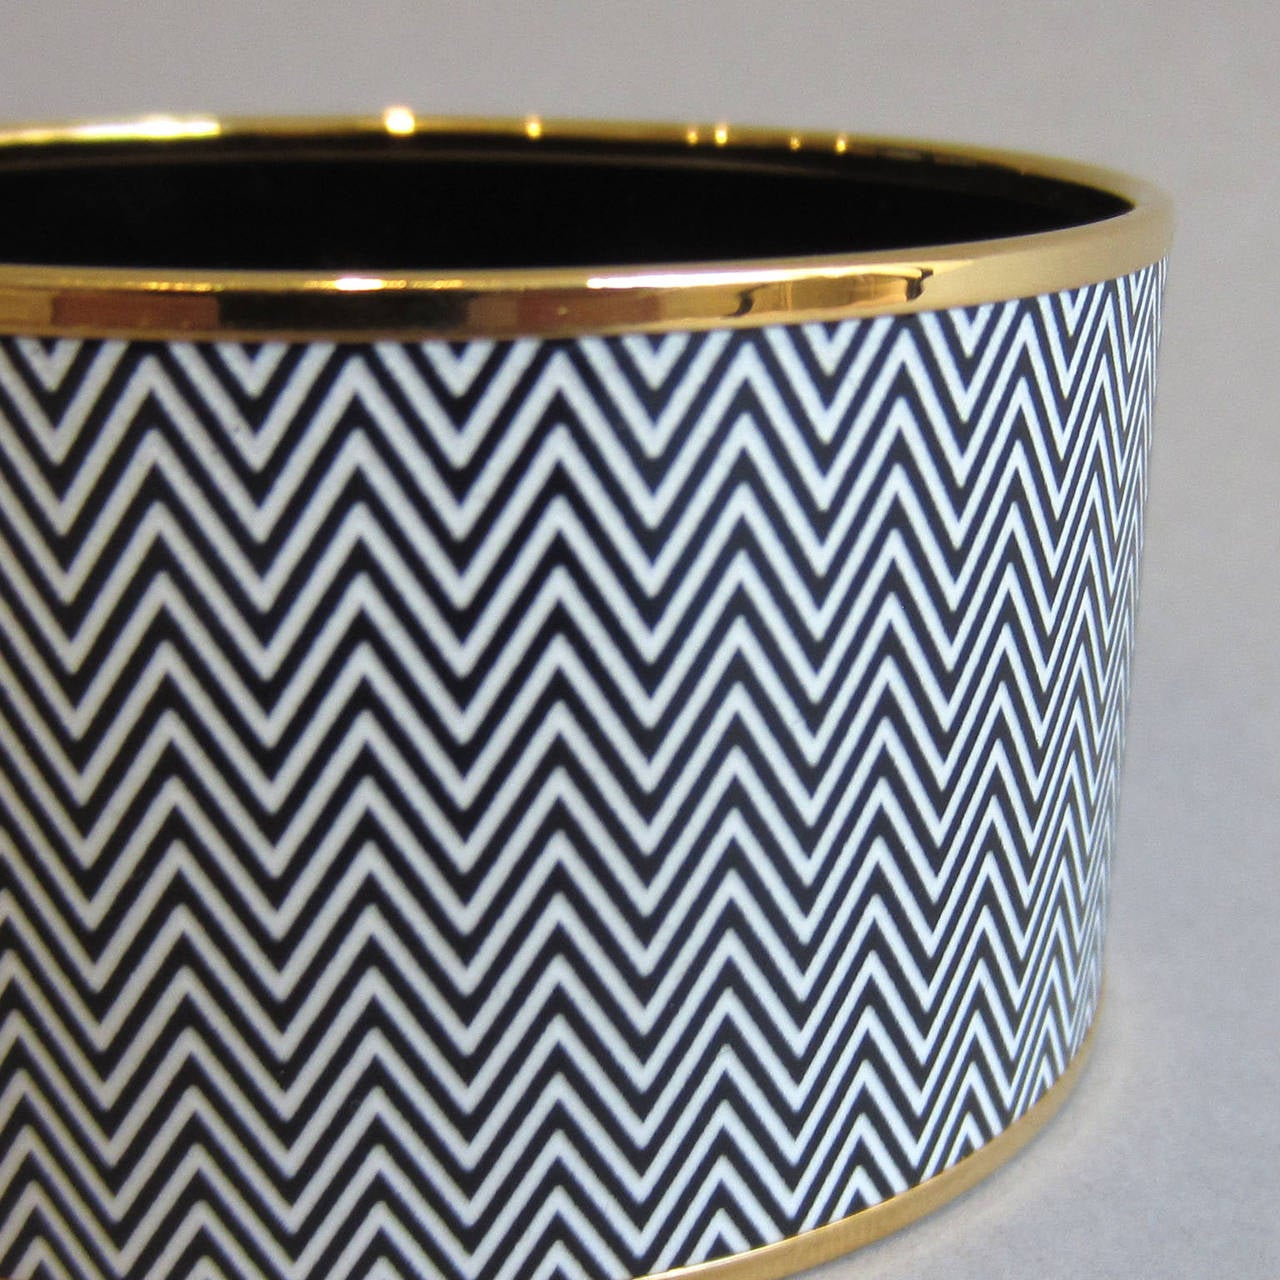 Beautiful and classic, this HERMES Bangle bracelet features a dark gray/black and white zig zag print. The print is accented with gold trim. The interior of the bracelet is black. Labeled Hermes. The original box and velvet pouch are included with